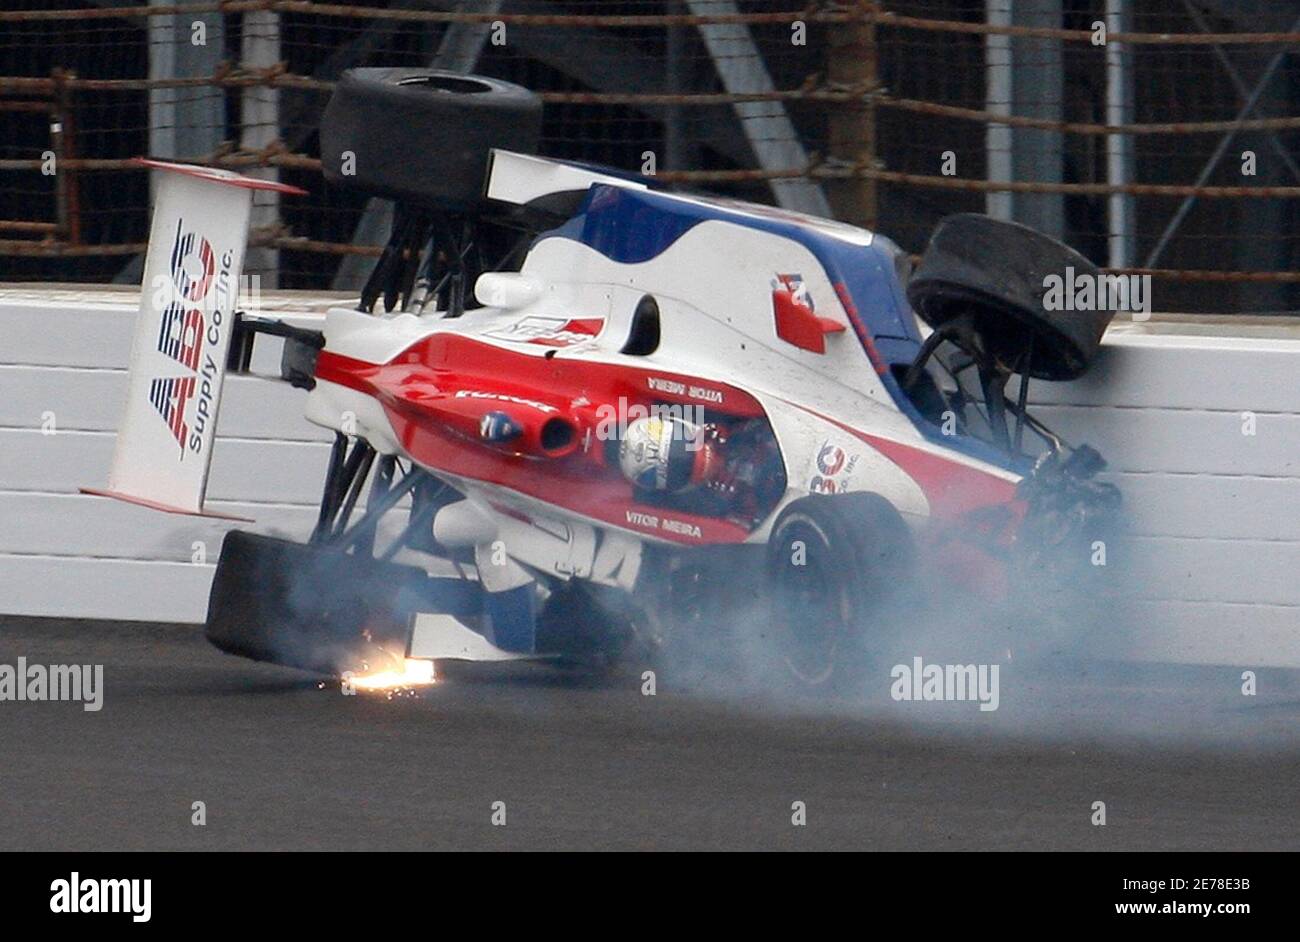 Vitor Meira of Brazil slides along the wall after crashing during the 93rd running of the Indianapolis 500 auto race in Indianapolis, Indiana, May 24, 2009.     REUTERS/Brent Smith (UNITED STATES SPORT MOTOR RACING) Stock Photo